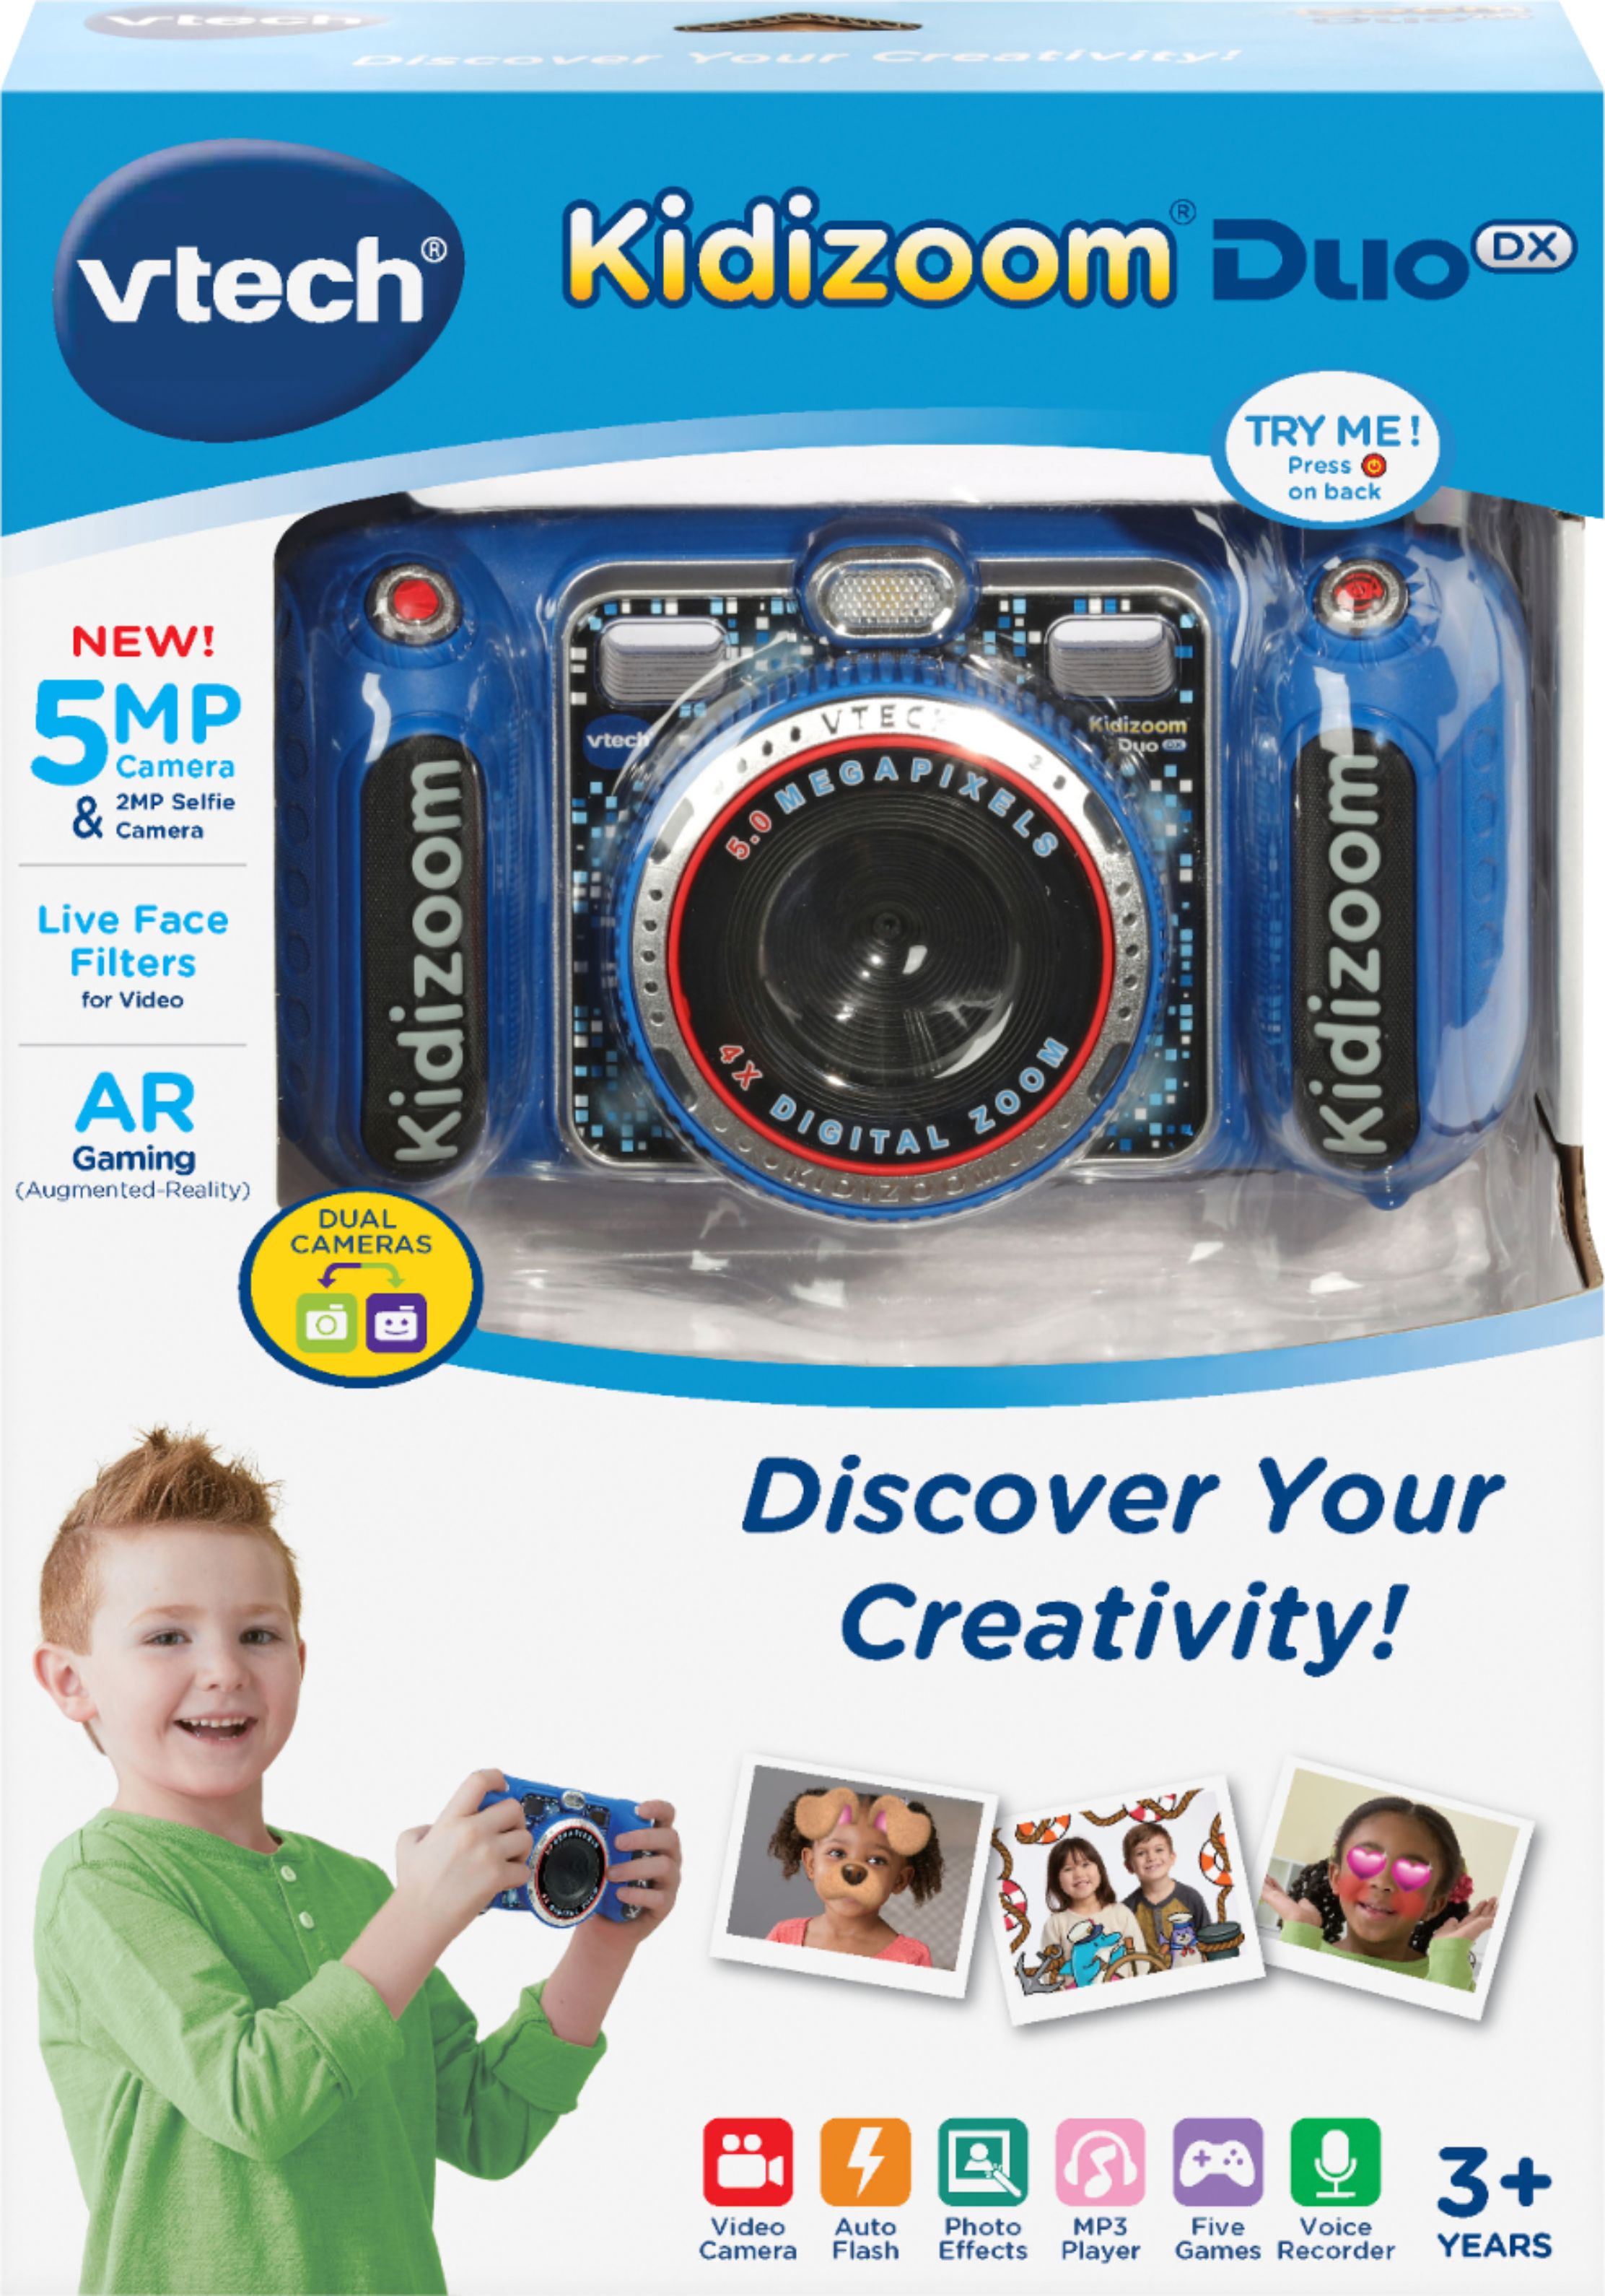 Vtech Kidizoom Duo 5.0 Digital Camera, Blue - Science & Electronic Toys